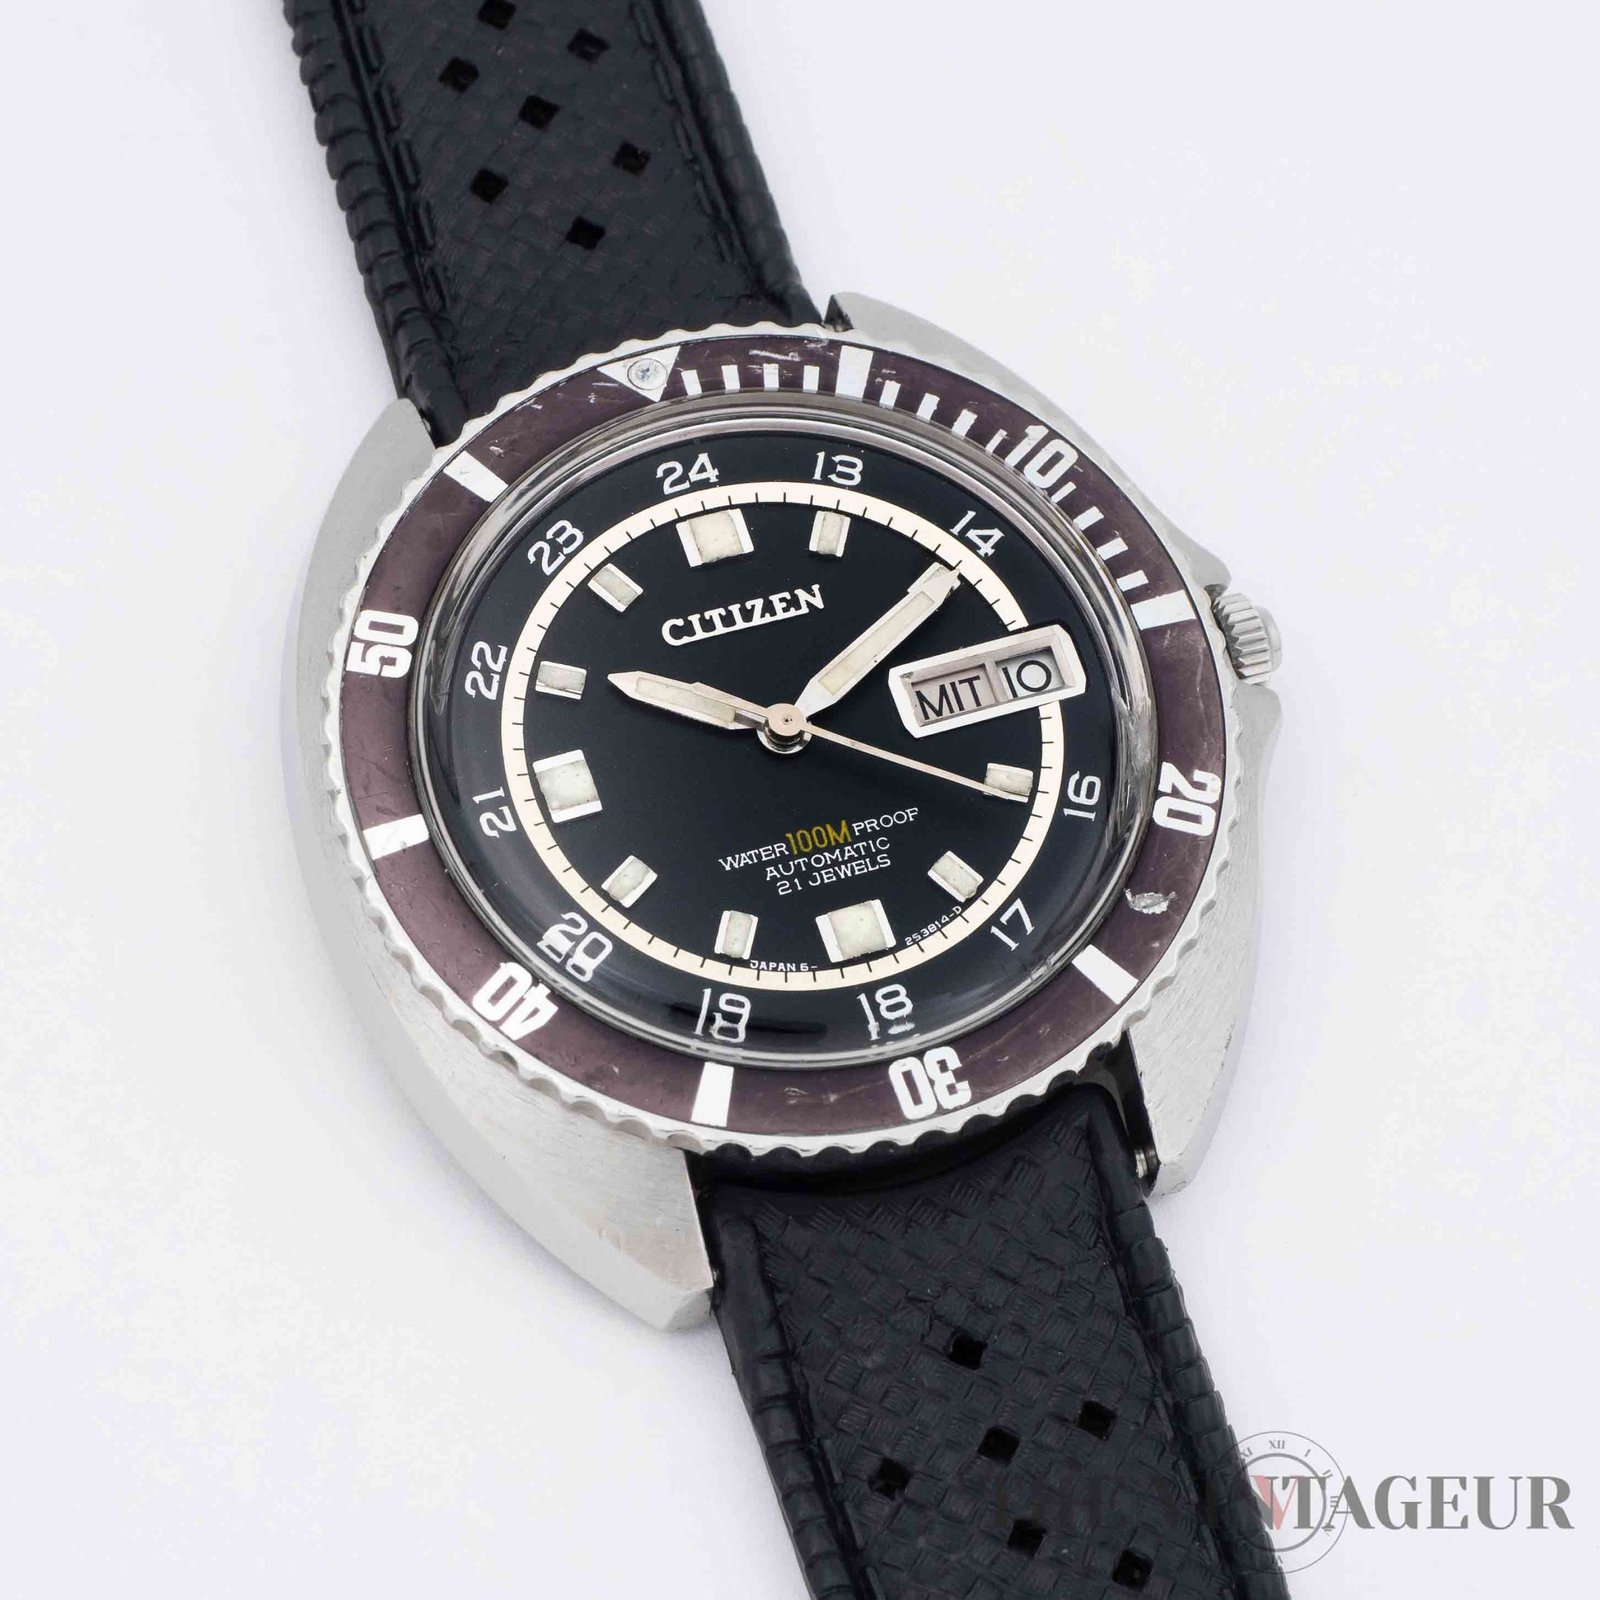 Citizen - Divers day date - The Vintageur - Your bespoke watches collection - Collectible watches and more